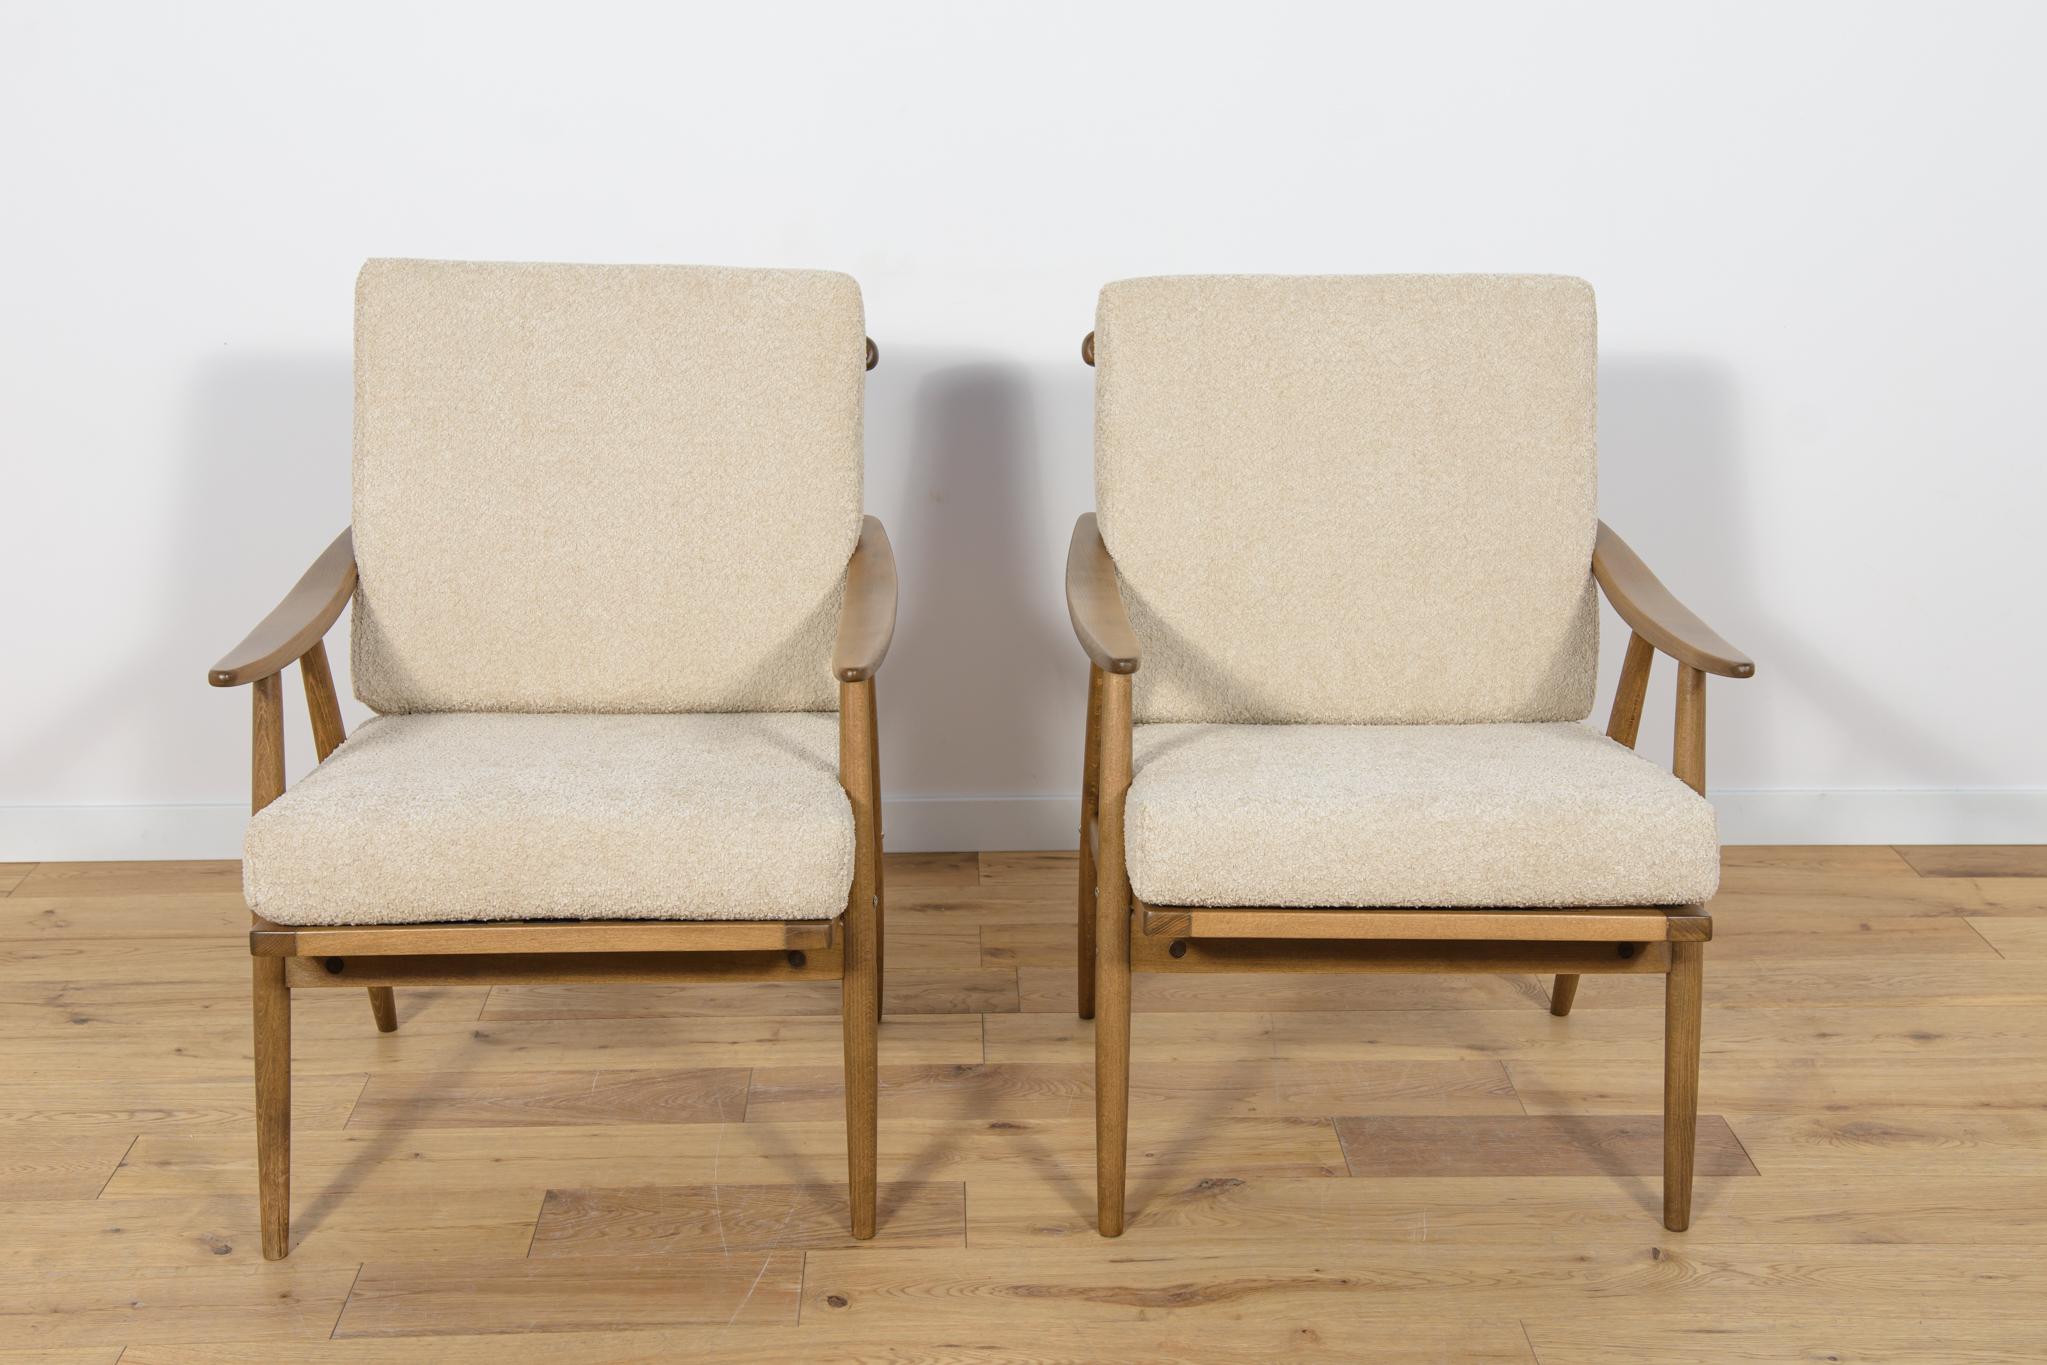 This pair of armchairs was produced by the Czechoslovak company TON in the 1960s. The beech elements have been cleaned from the old surface and painted in a walnut stain and finished with a strong semi matt lacquer. The pillows have been replaced